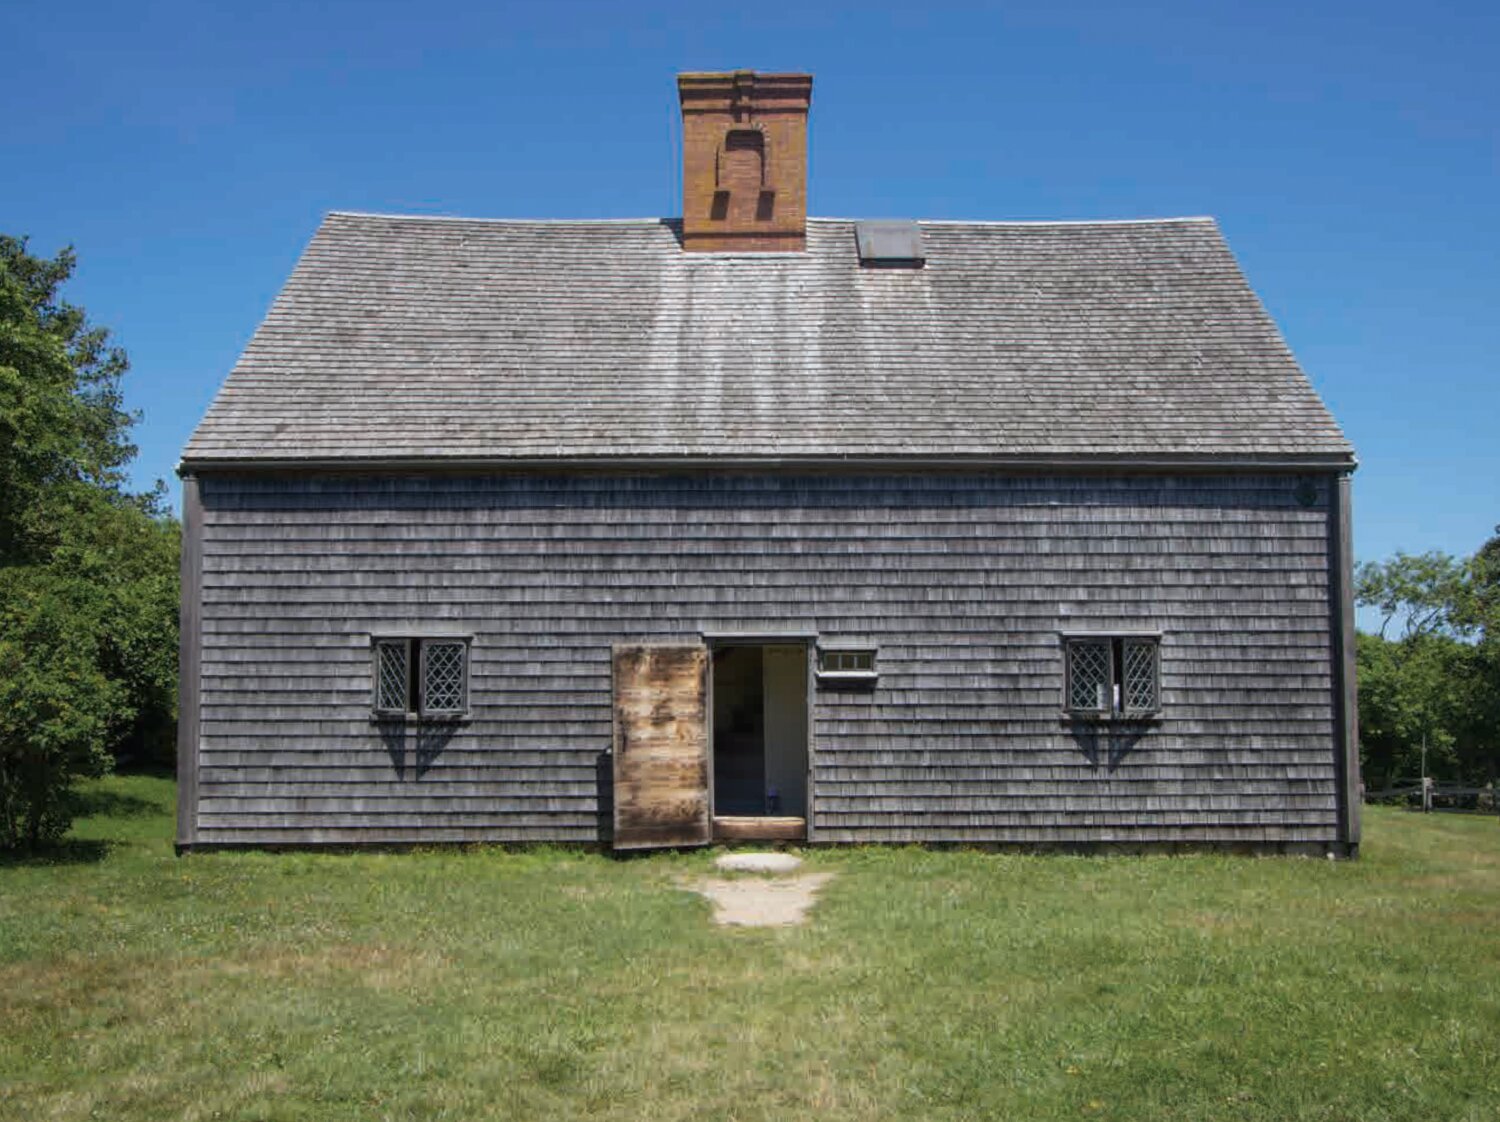 The Jethro Coffin House, also known as Nantucket’s Oldest House, on Sunset Hill.